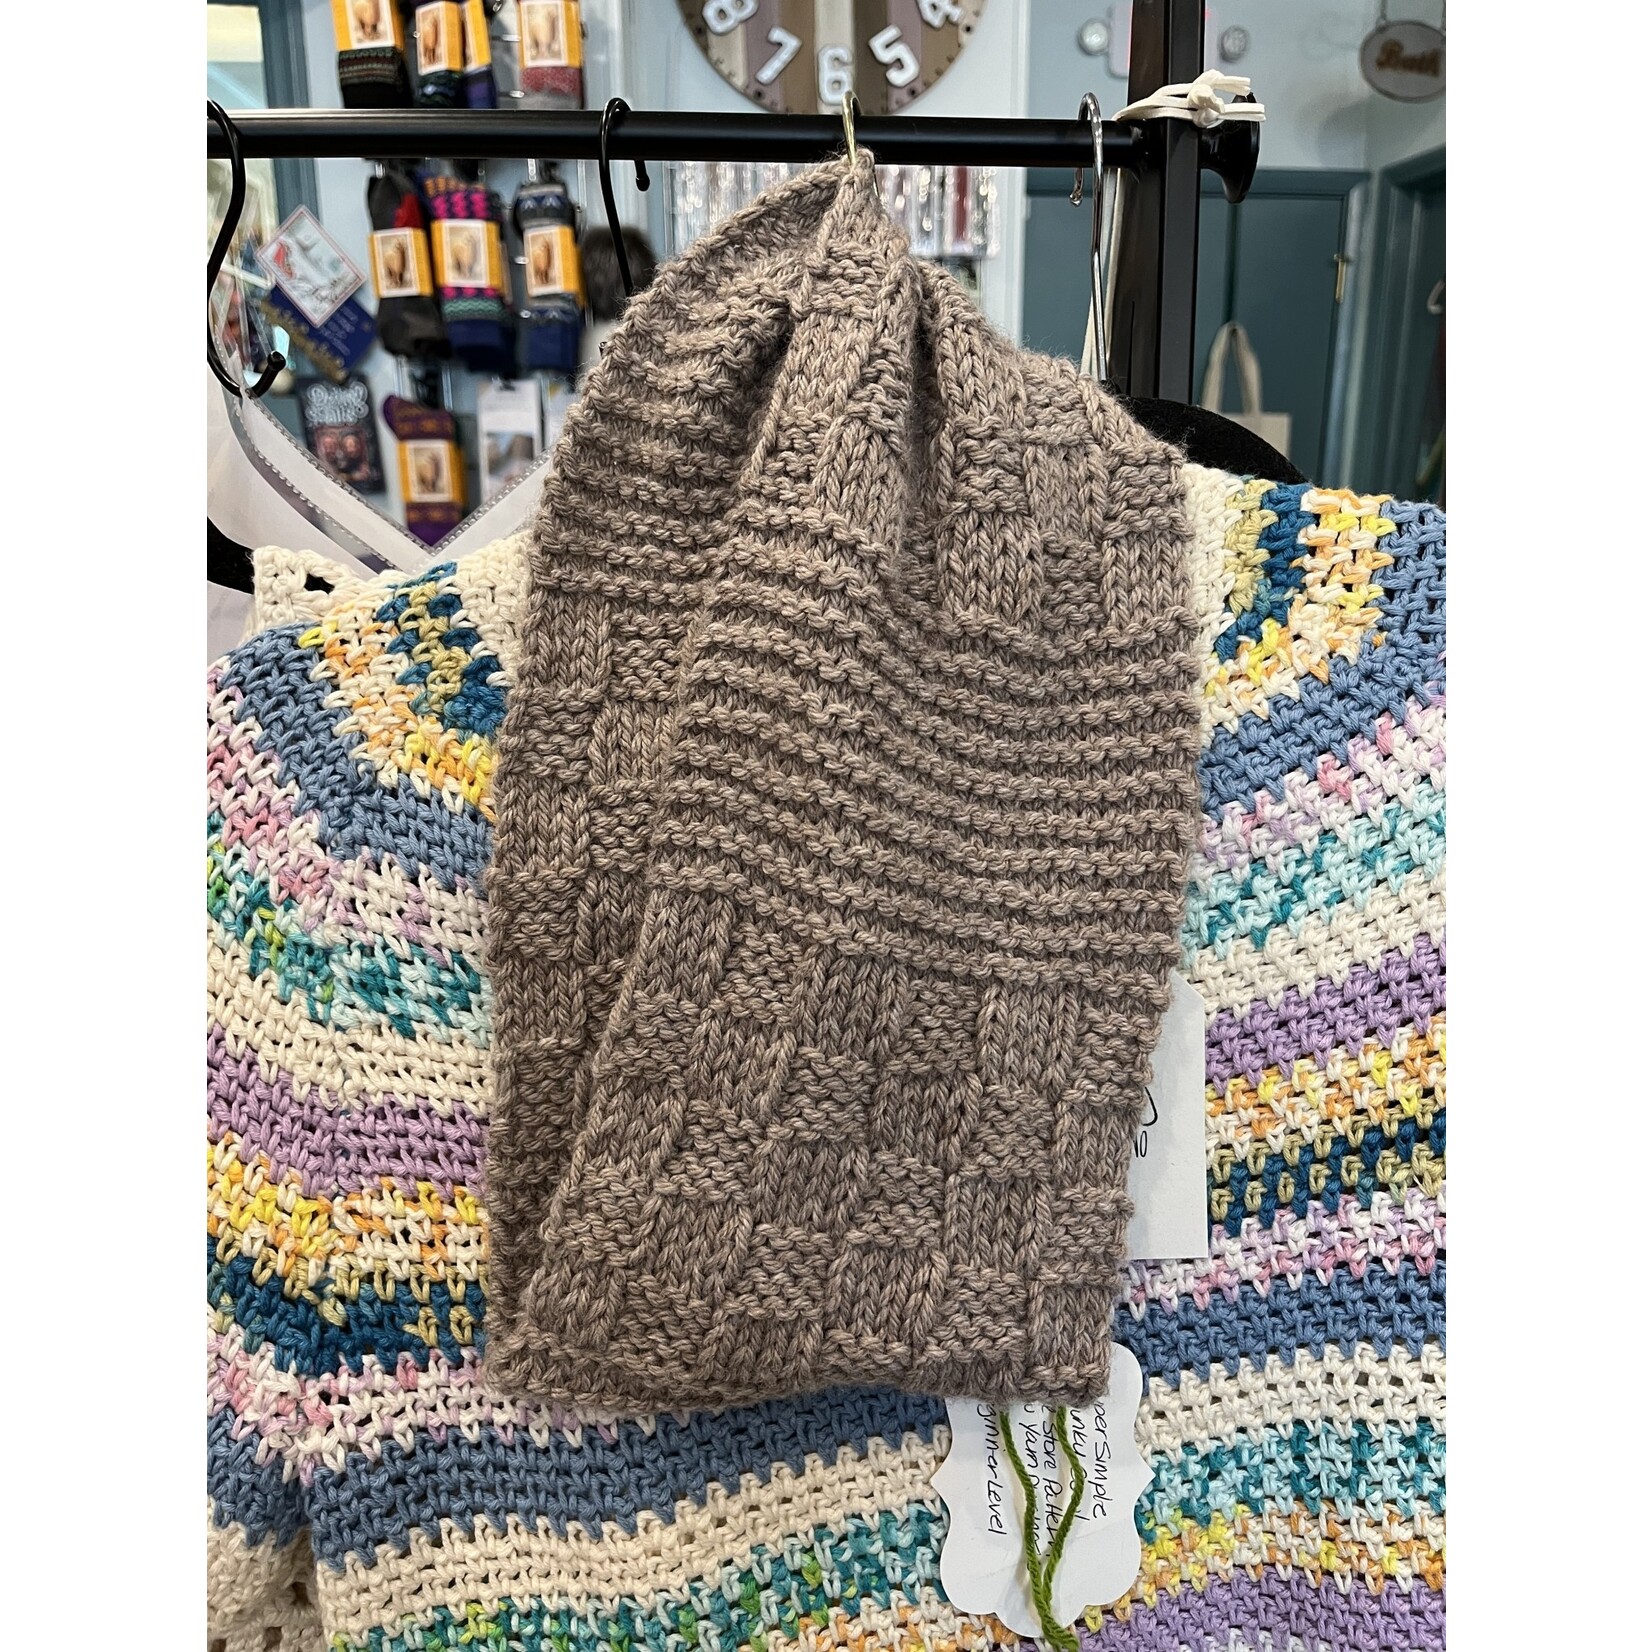 KKN Intro to Knitting – Learn to Make a Cowl –  5/8, 5/16, 5/23, 5/30 5:30-7:30pm